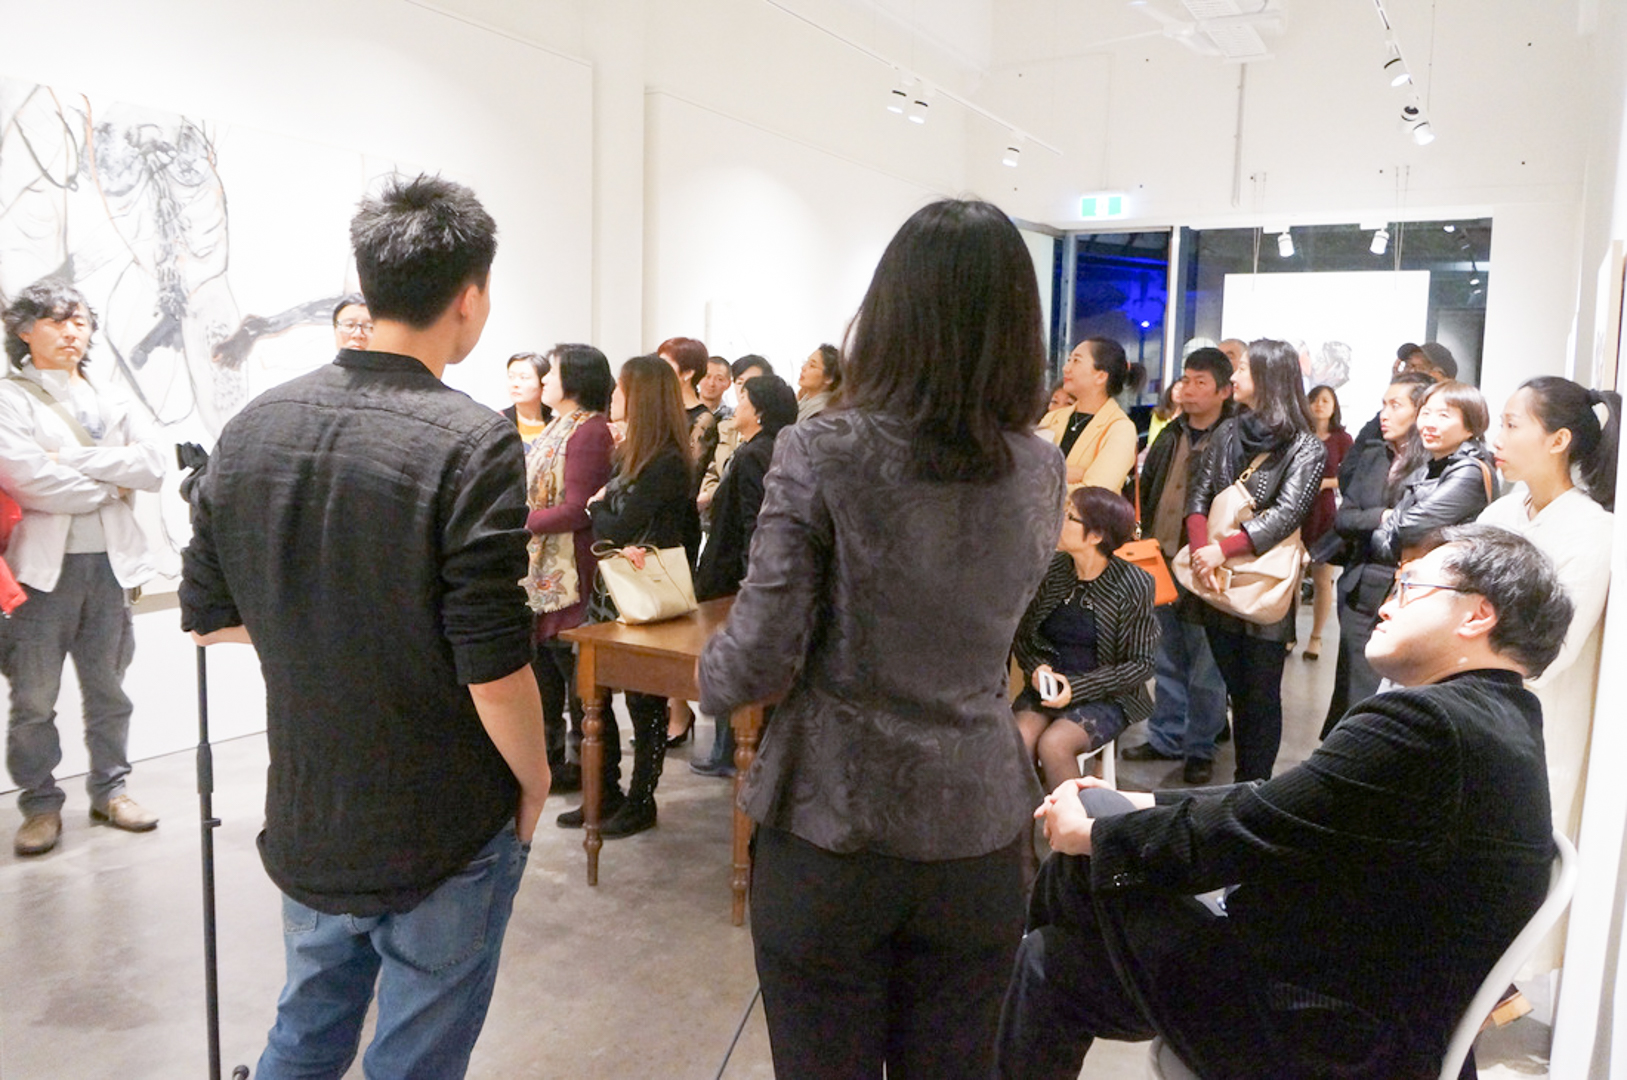 nk Instinct, Sun Ziyao's first solo exhibition in Australia was opened by Dr Richard Wu Co-curated by Yeqin Zuo and Guan Wei